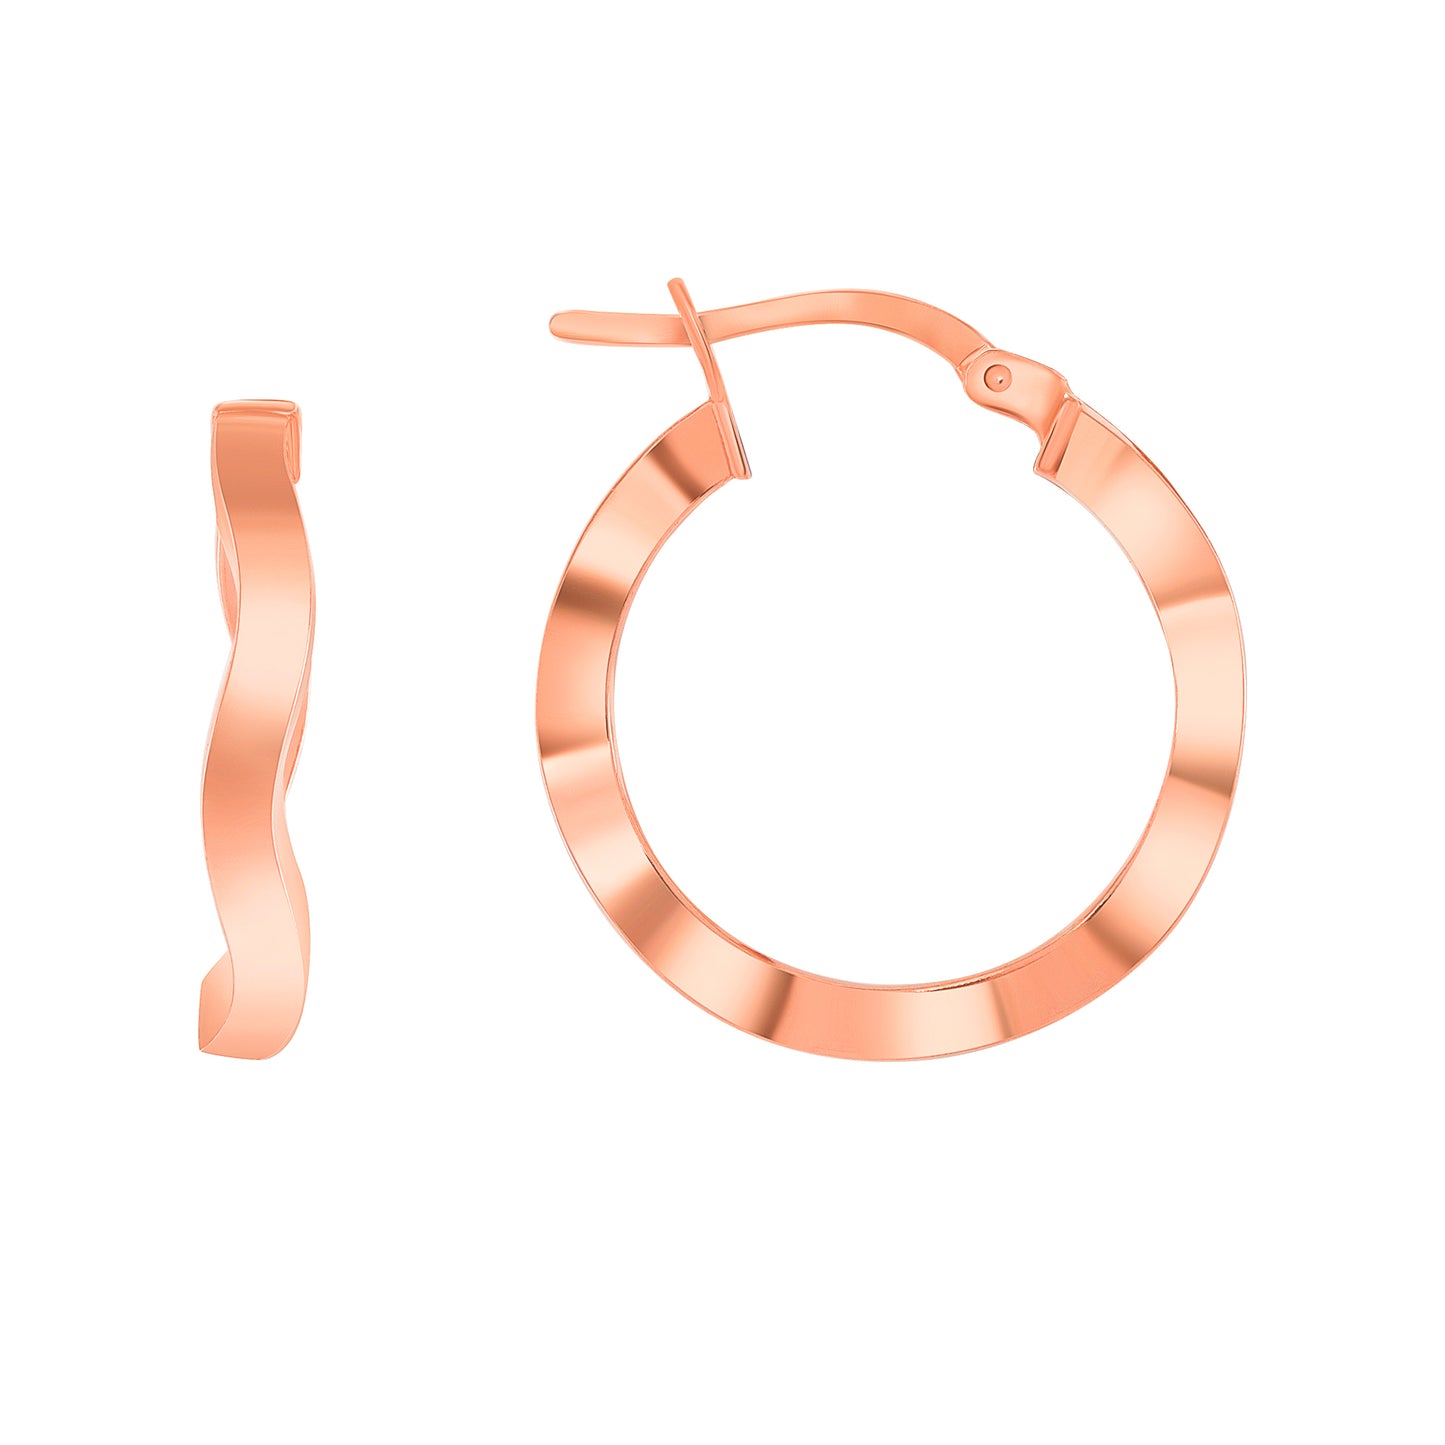 Silver 925 Rose Gold Plated Small Circle Wavy Plain Hoop Earring 2MM. ITE218RG